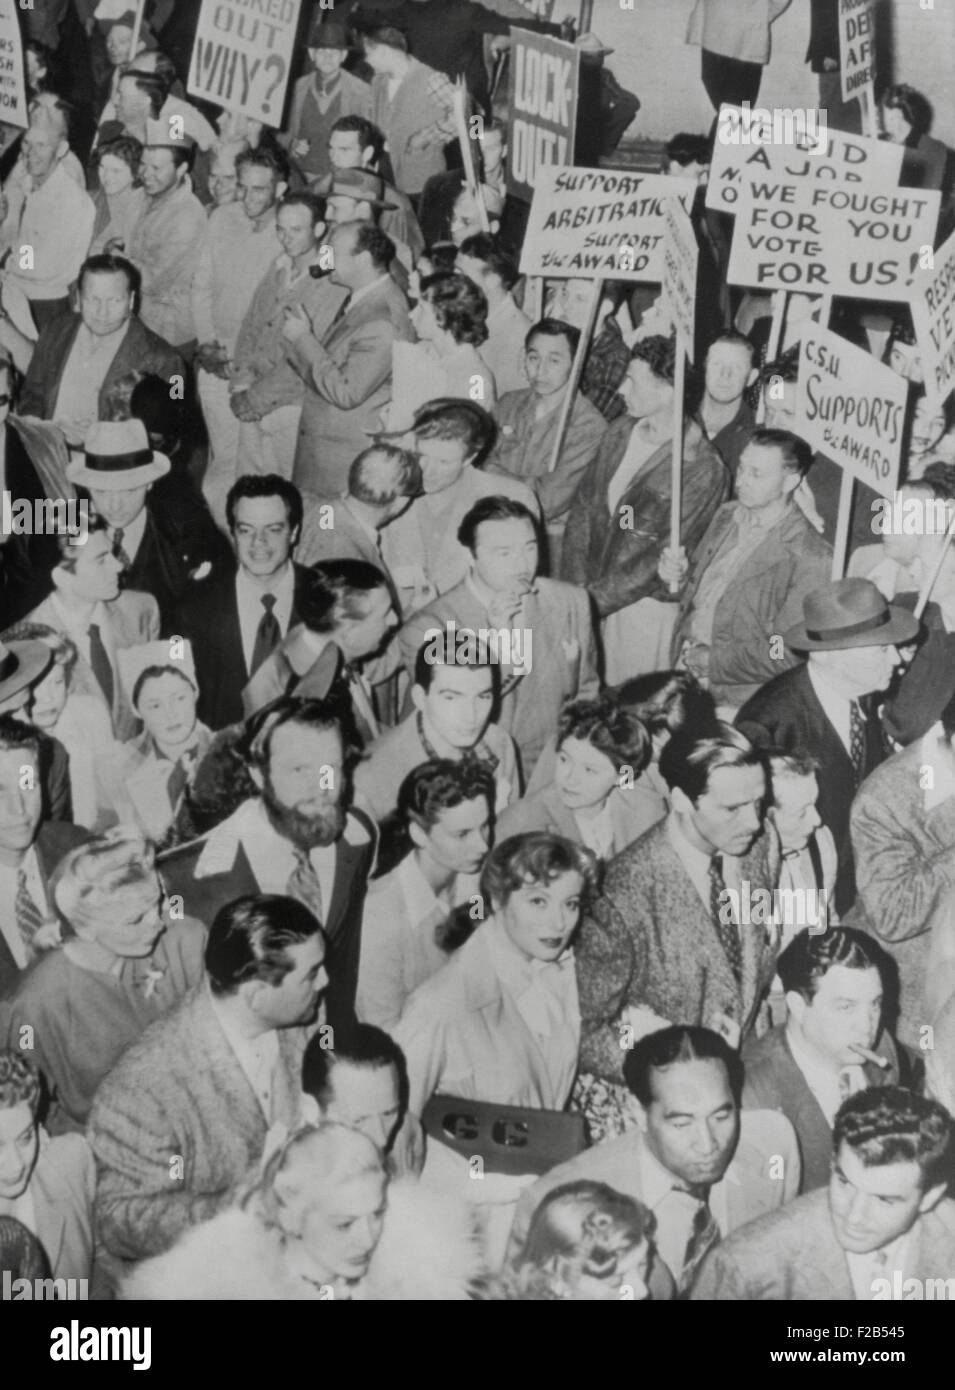 Actress Greer Garson joins strikers of the Conference of Studio Unions in Hollywood. July 10, 1946. CSU strikes were led by Herb Sorrell, who was trying to establish a movie worker federation. Less radical unions and the anti-communist politics defeated the strike and eventually the Union. - (BSLOC 2014 17 89) Stock Photo